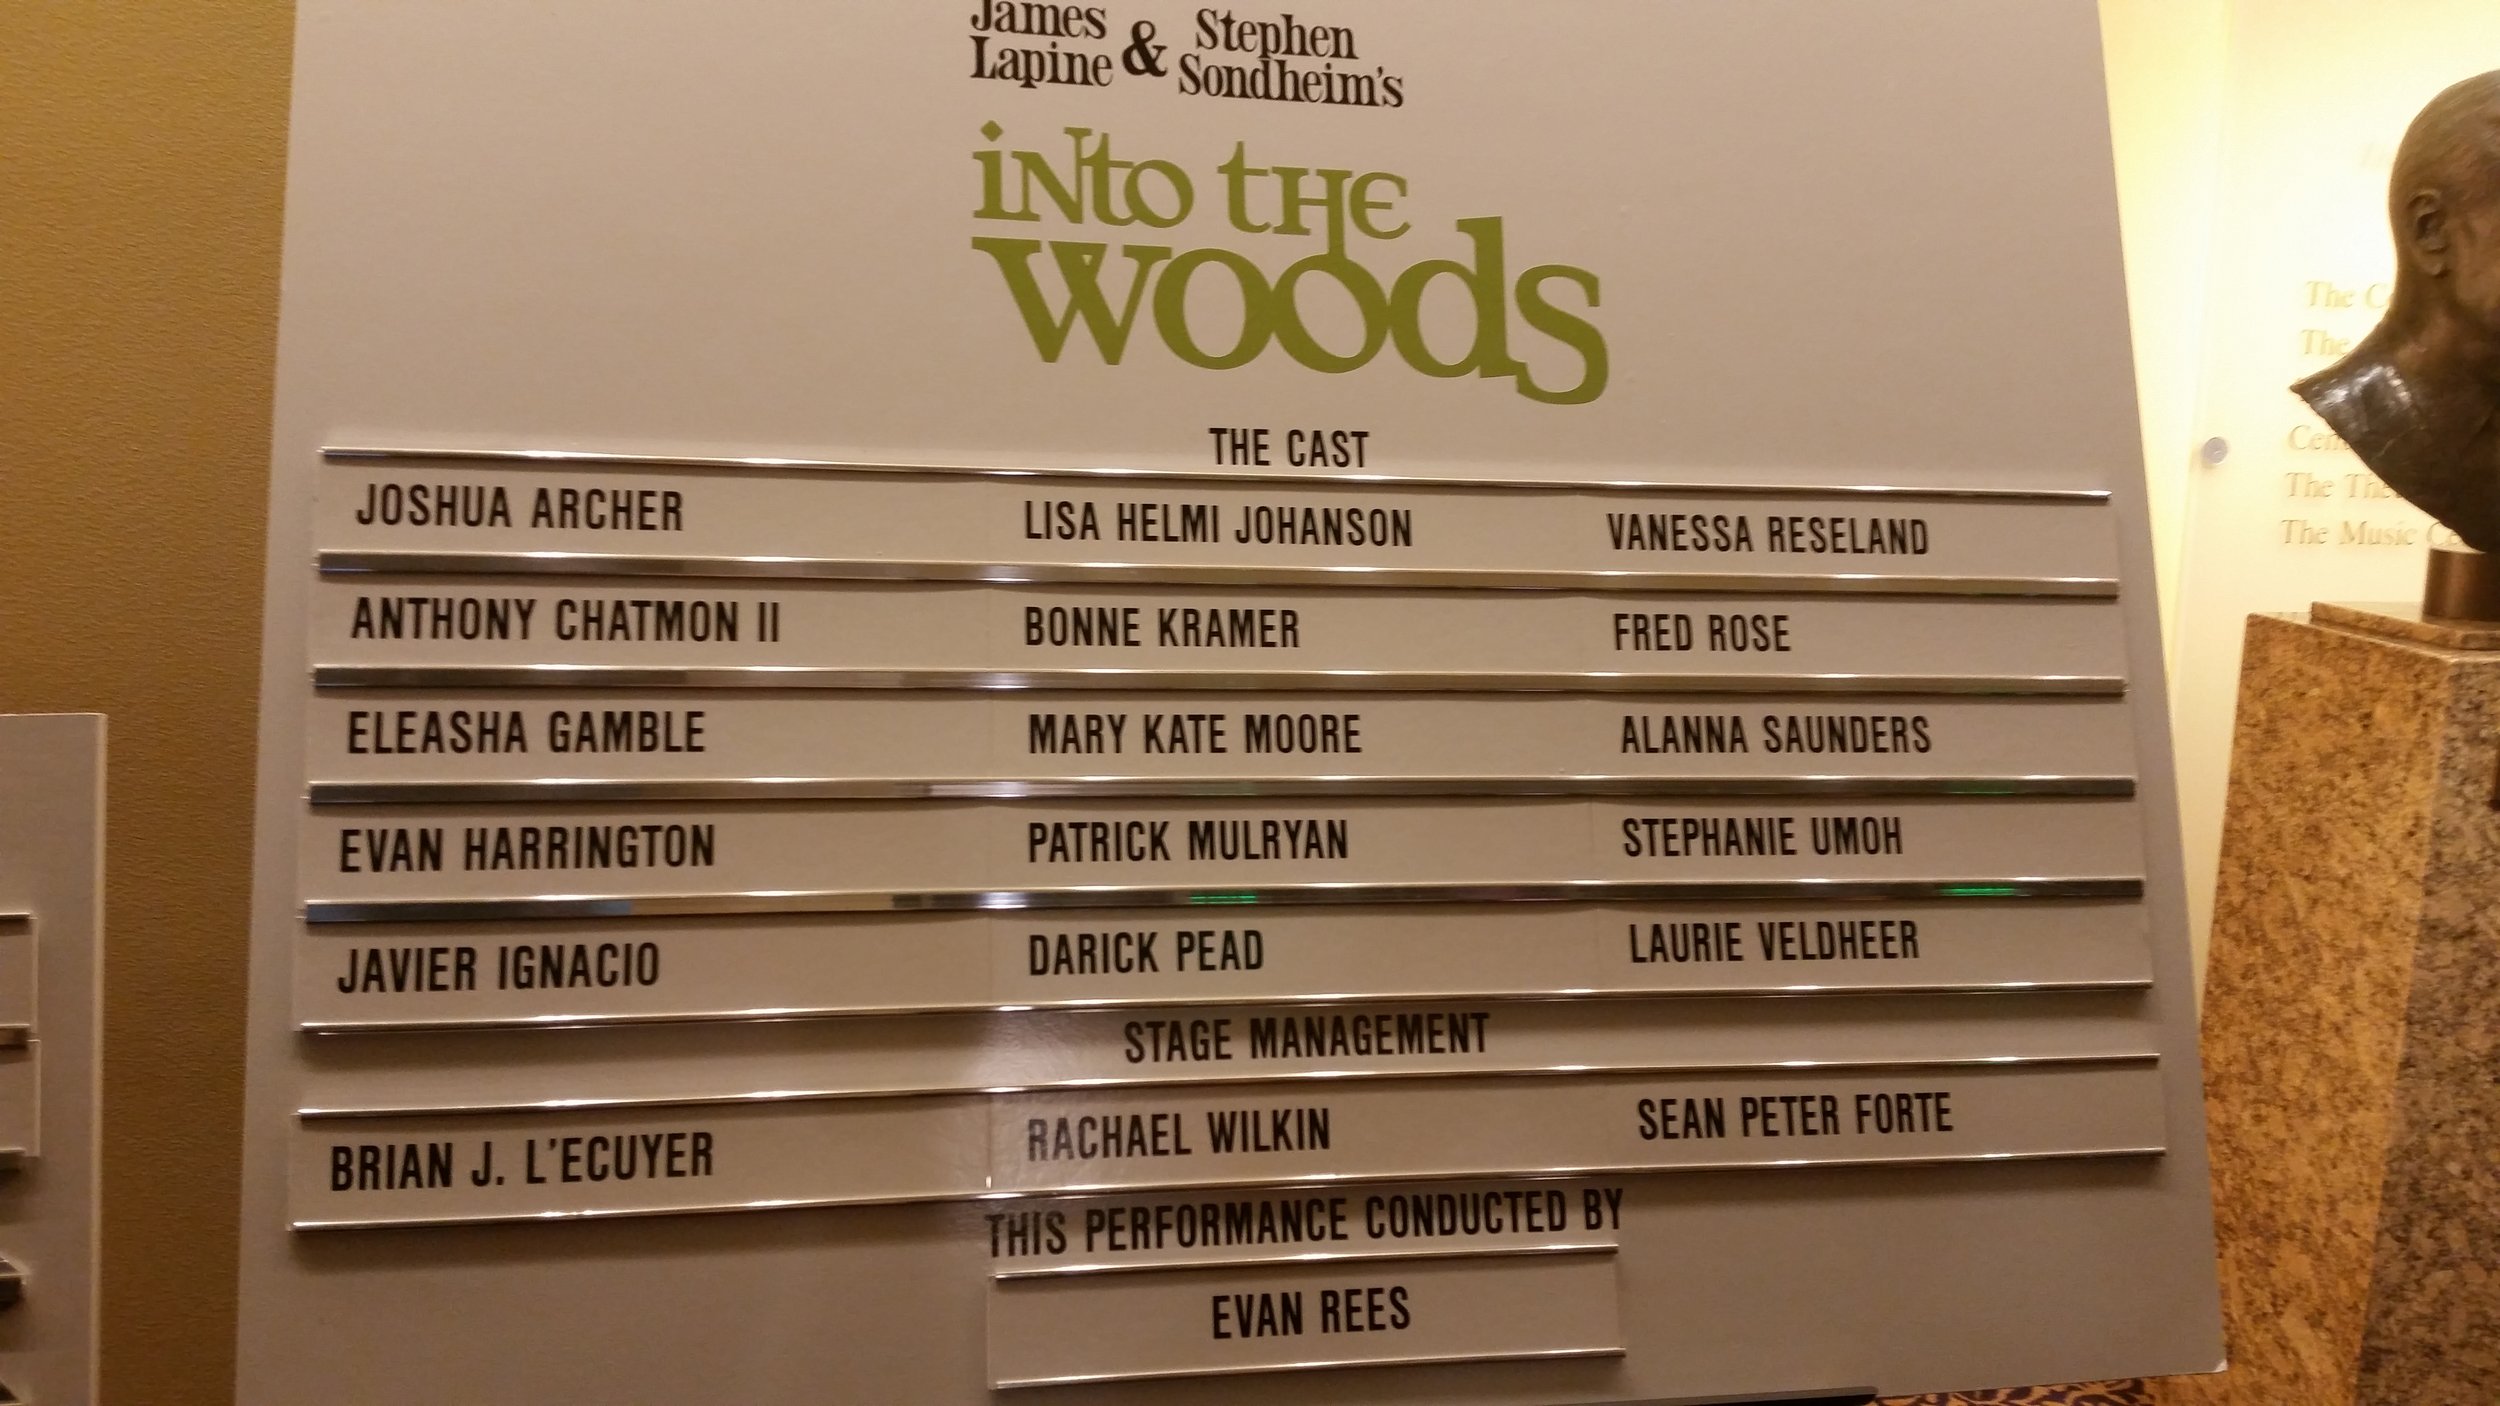 2017 May - Into The Woods tour - Alanna board.jpg